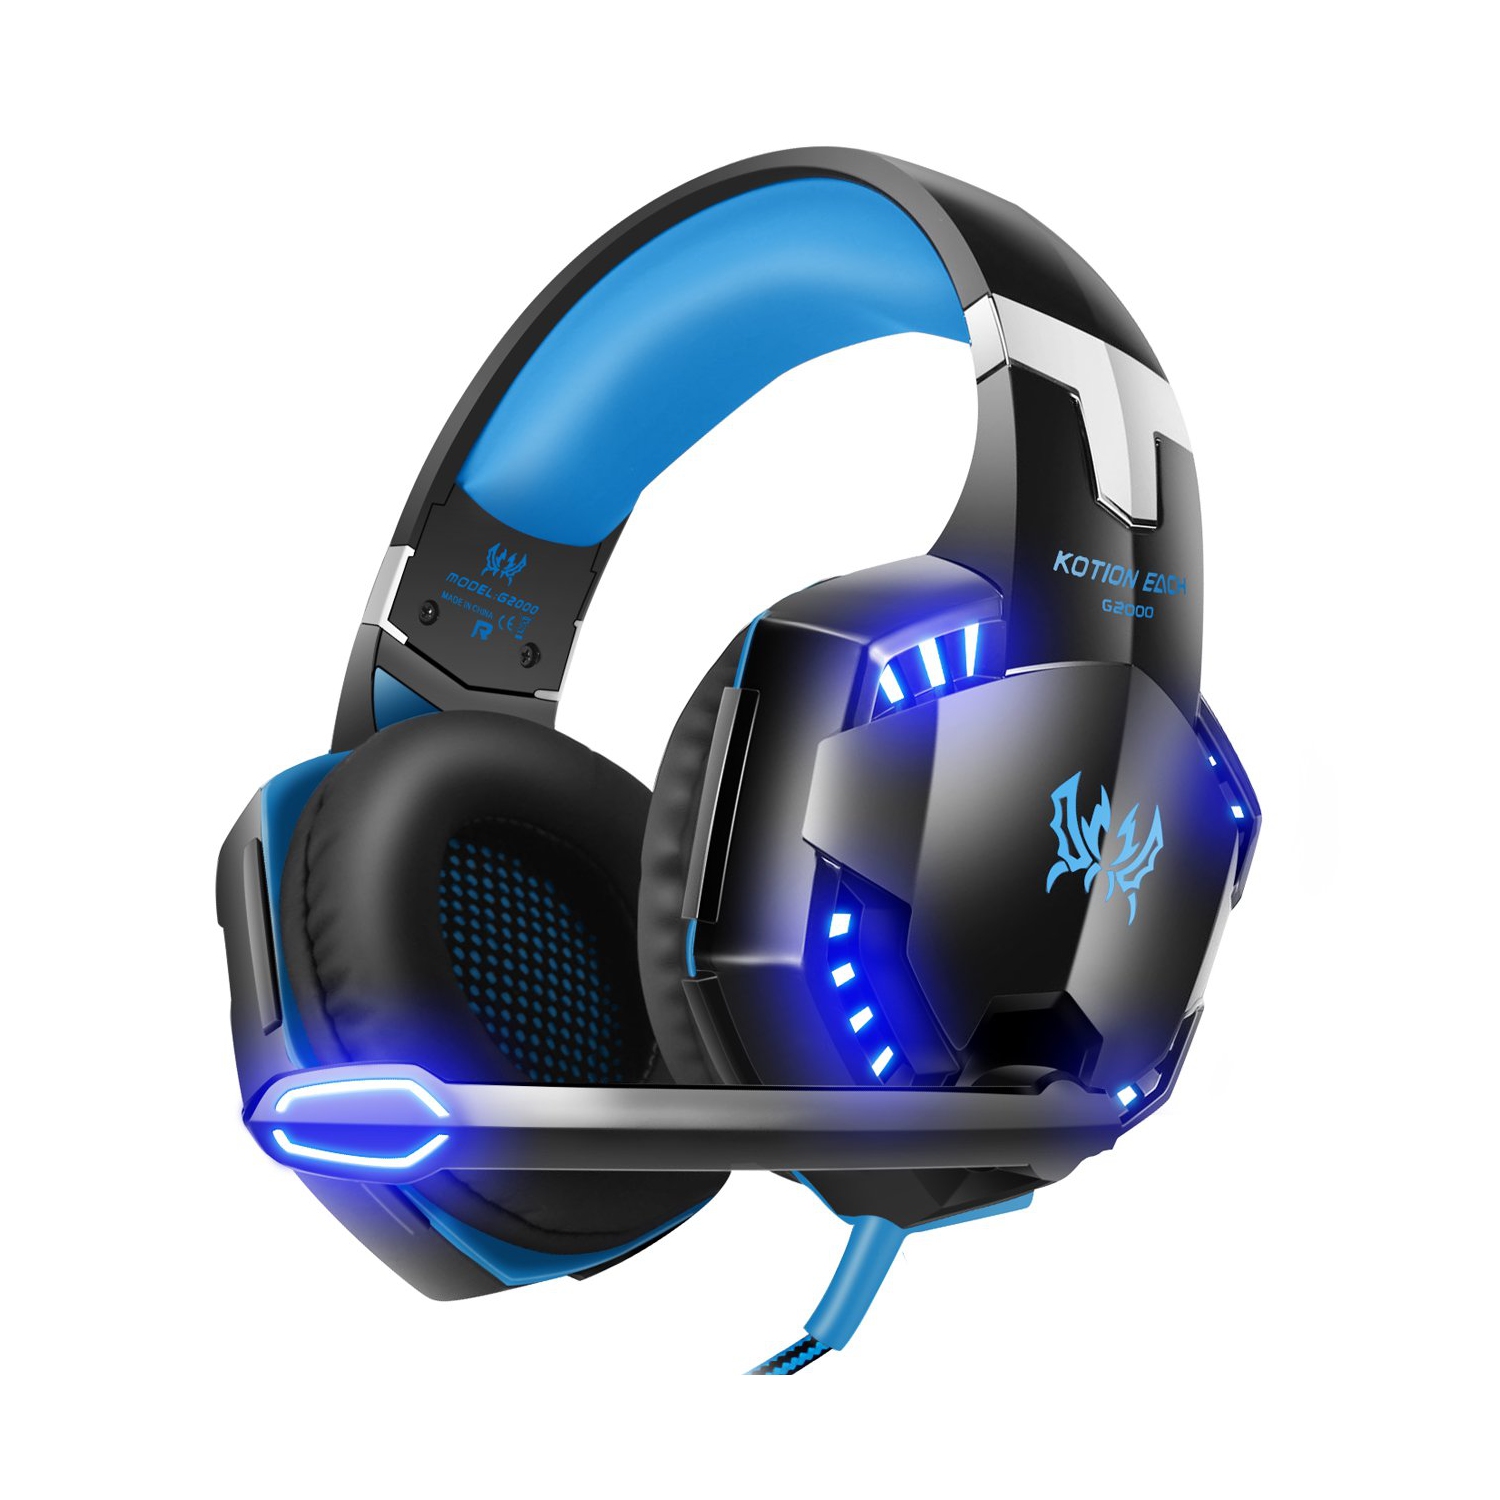 Gaming Headset for PS4 Xbox One PC Nintendo Switch, with Mic, LED Lights, Noise Reduction, Stereo Bass Surround